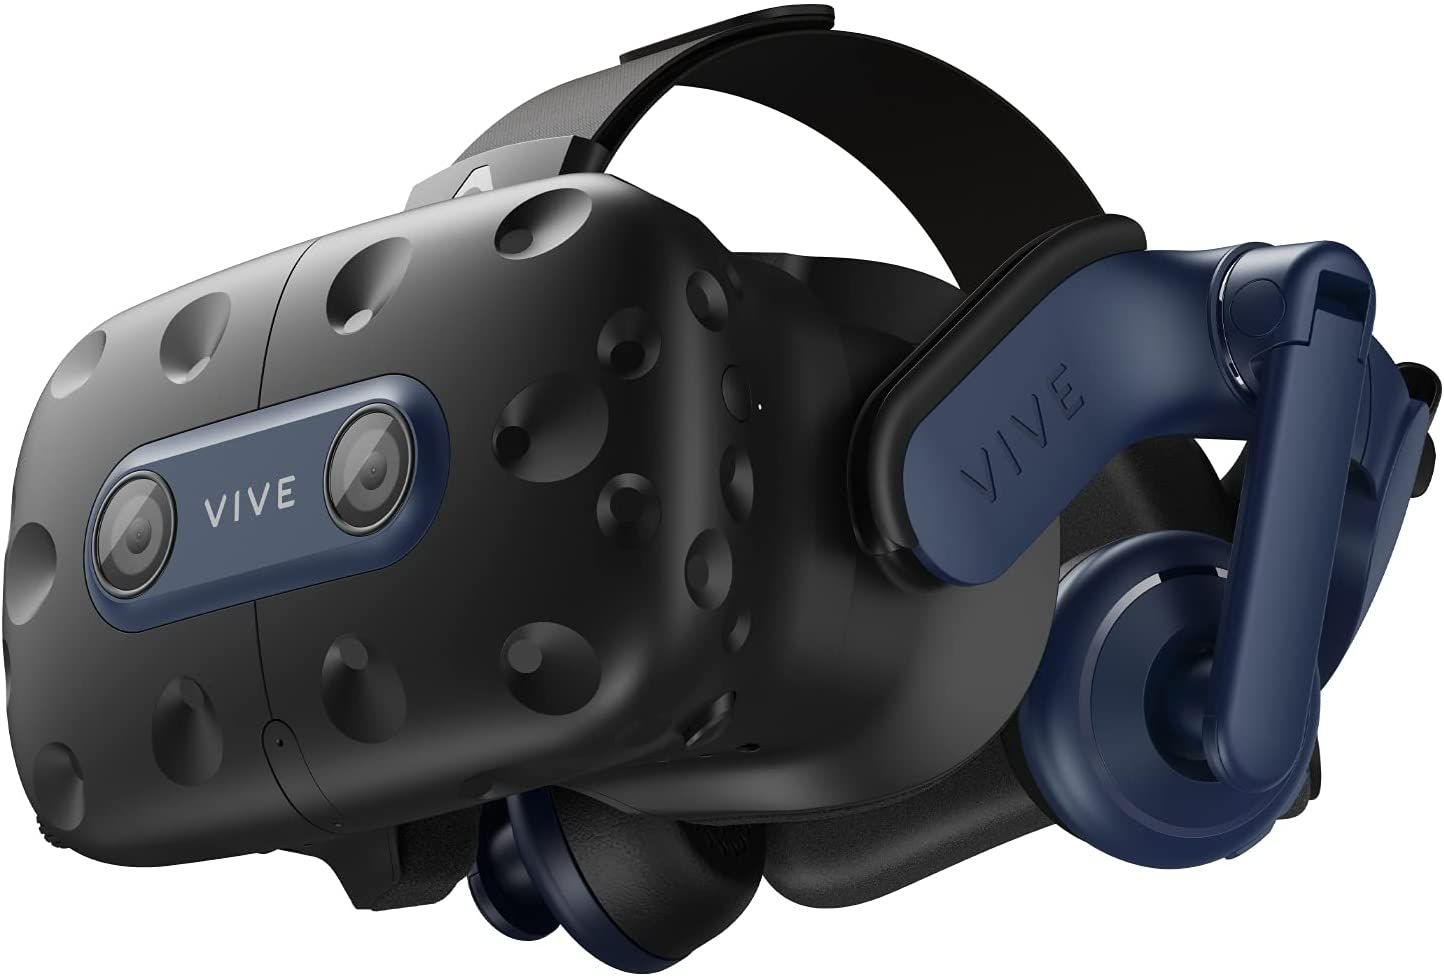 HTC VIVE Pro 2 product image of a black VR headset with dark blue accents.